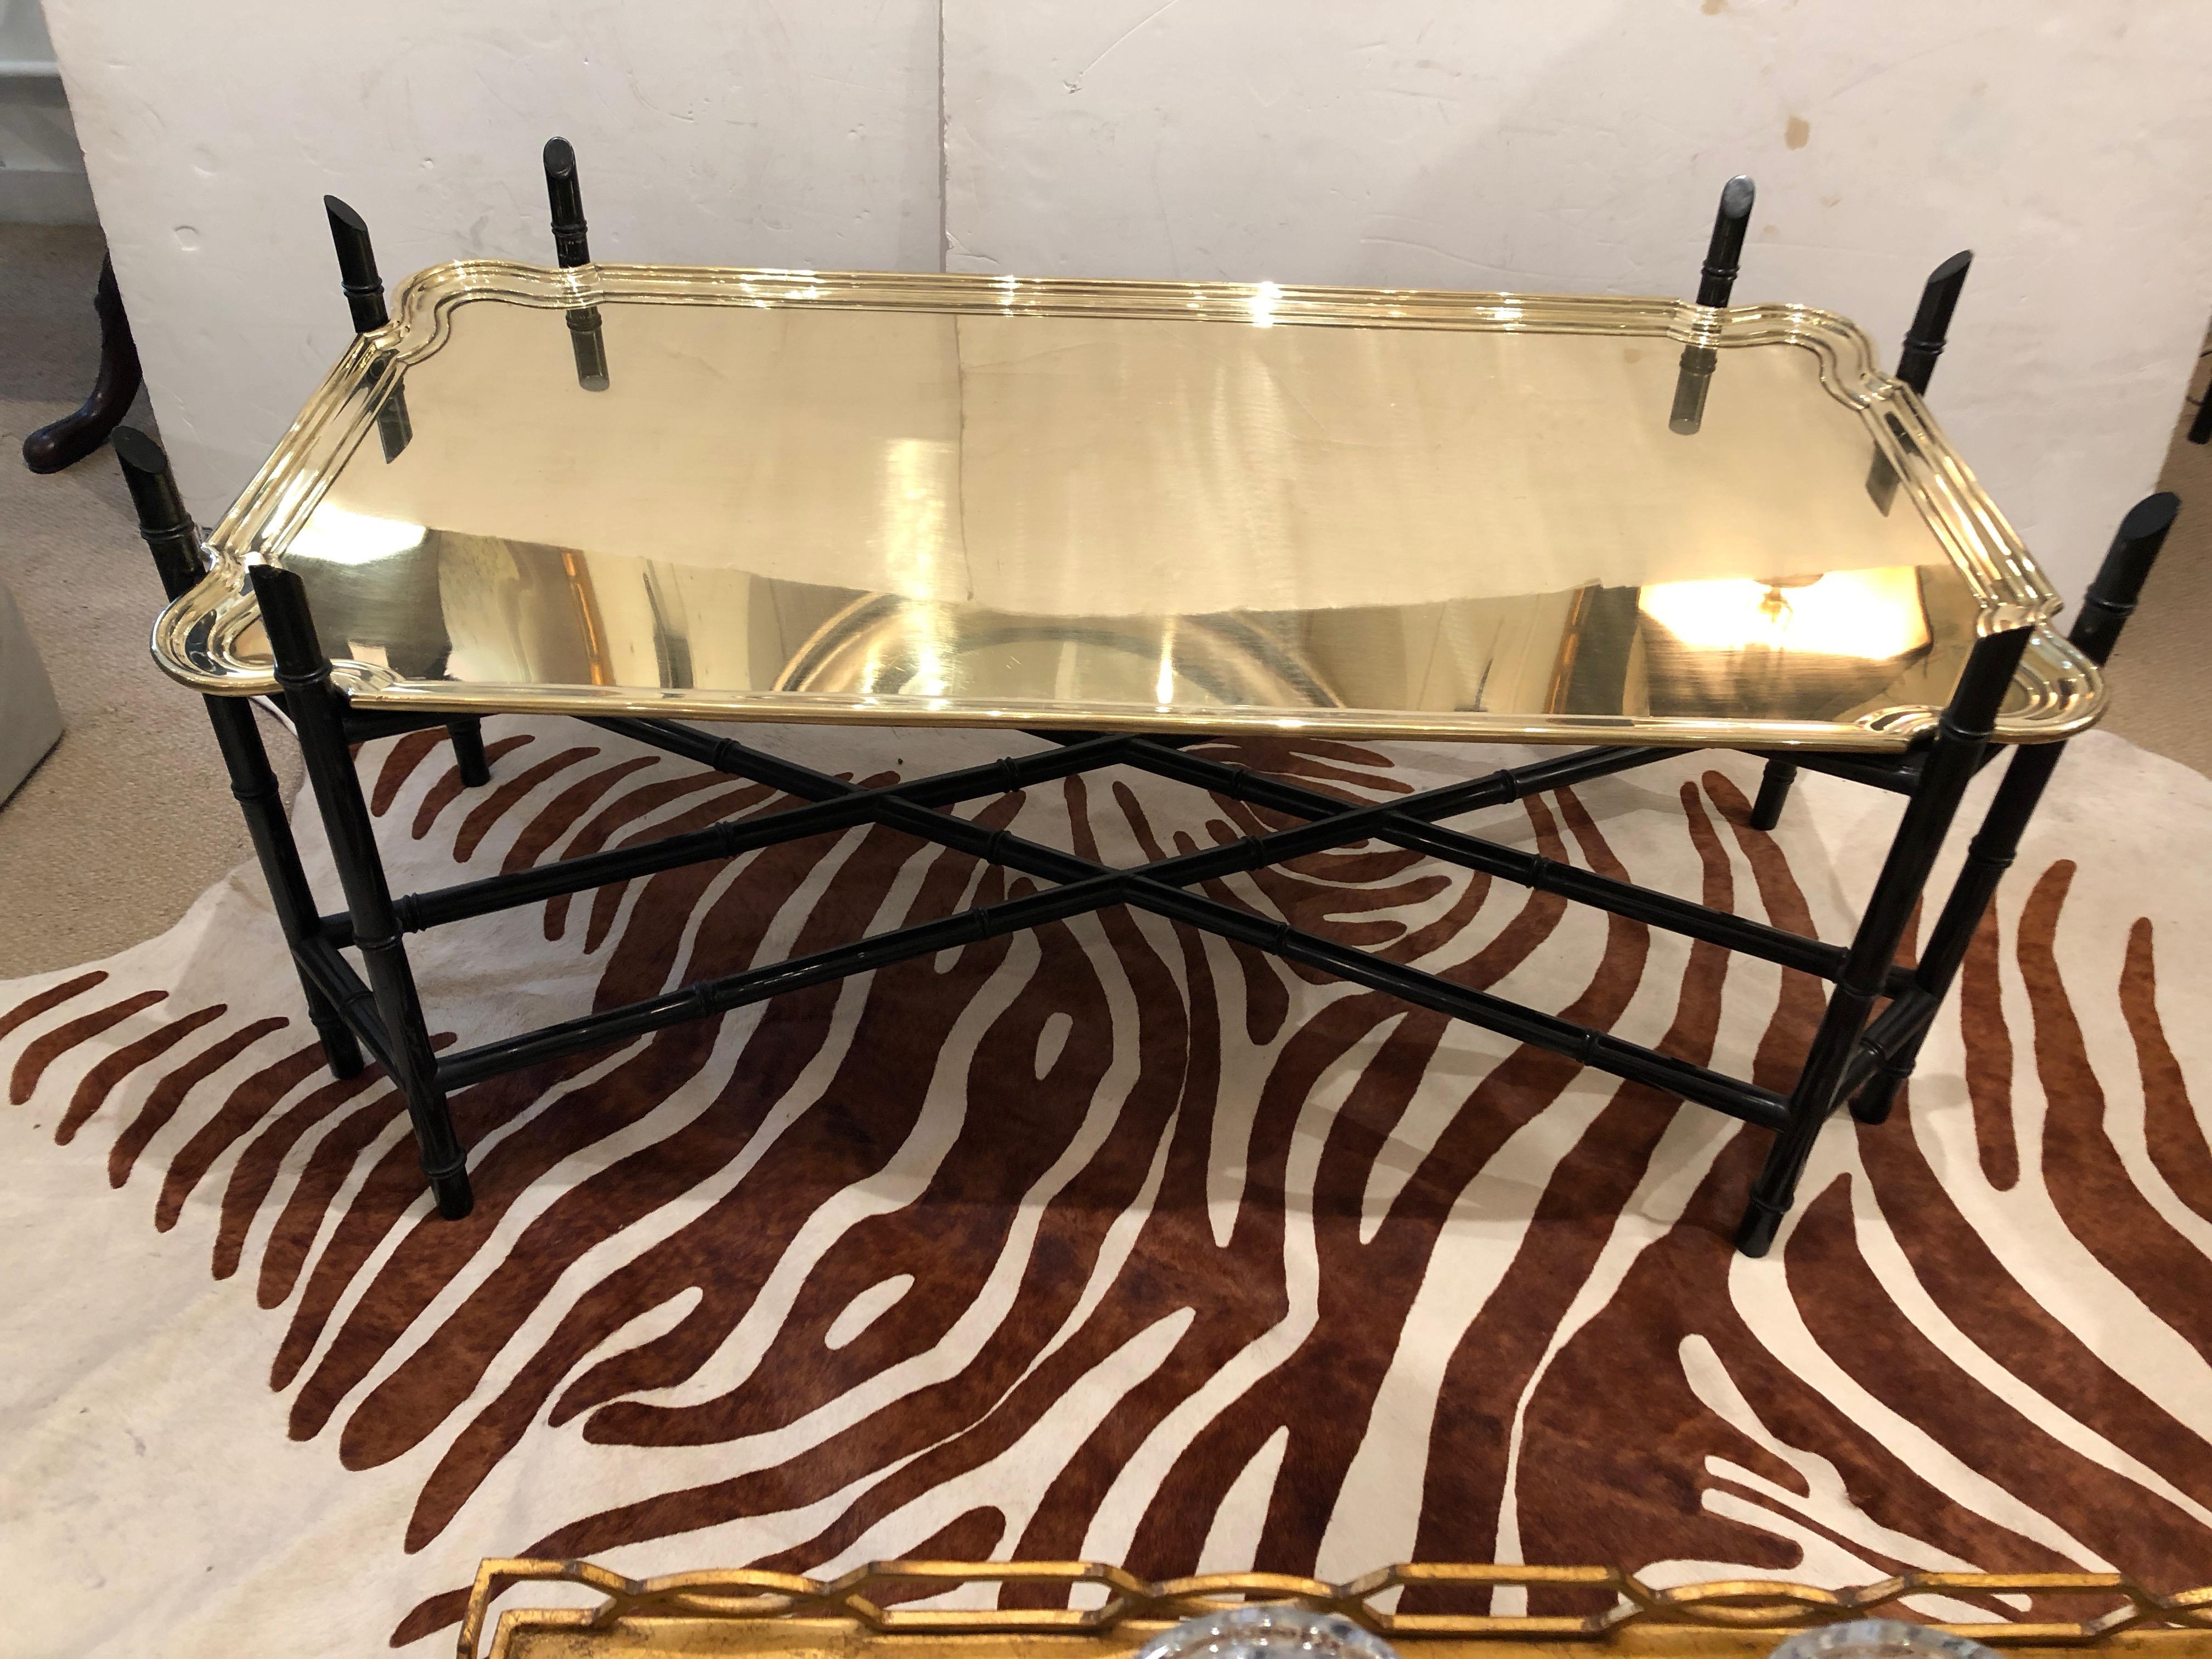 Rich looking transitional coffee table having a heavy super high quality (1/2 inch thick) brass scalloped rectangular tray and handsome faux bamboo ebonized base. The height to top of the tray is 18 inches. The bamboo frame extends above the tray.